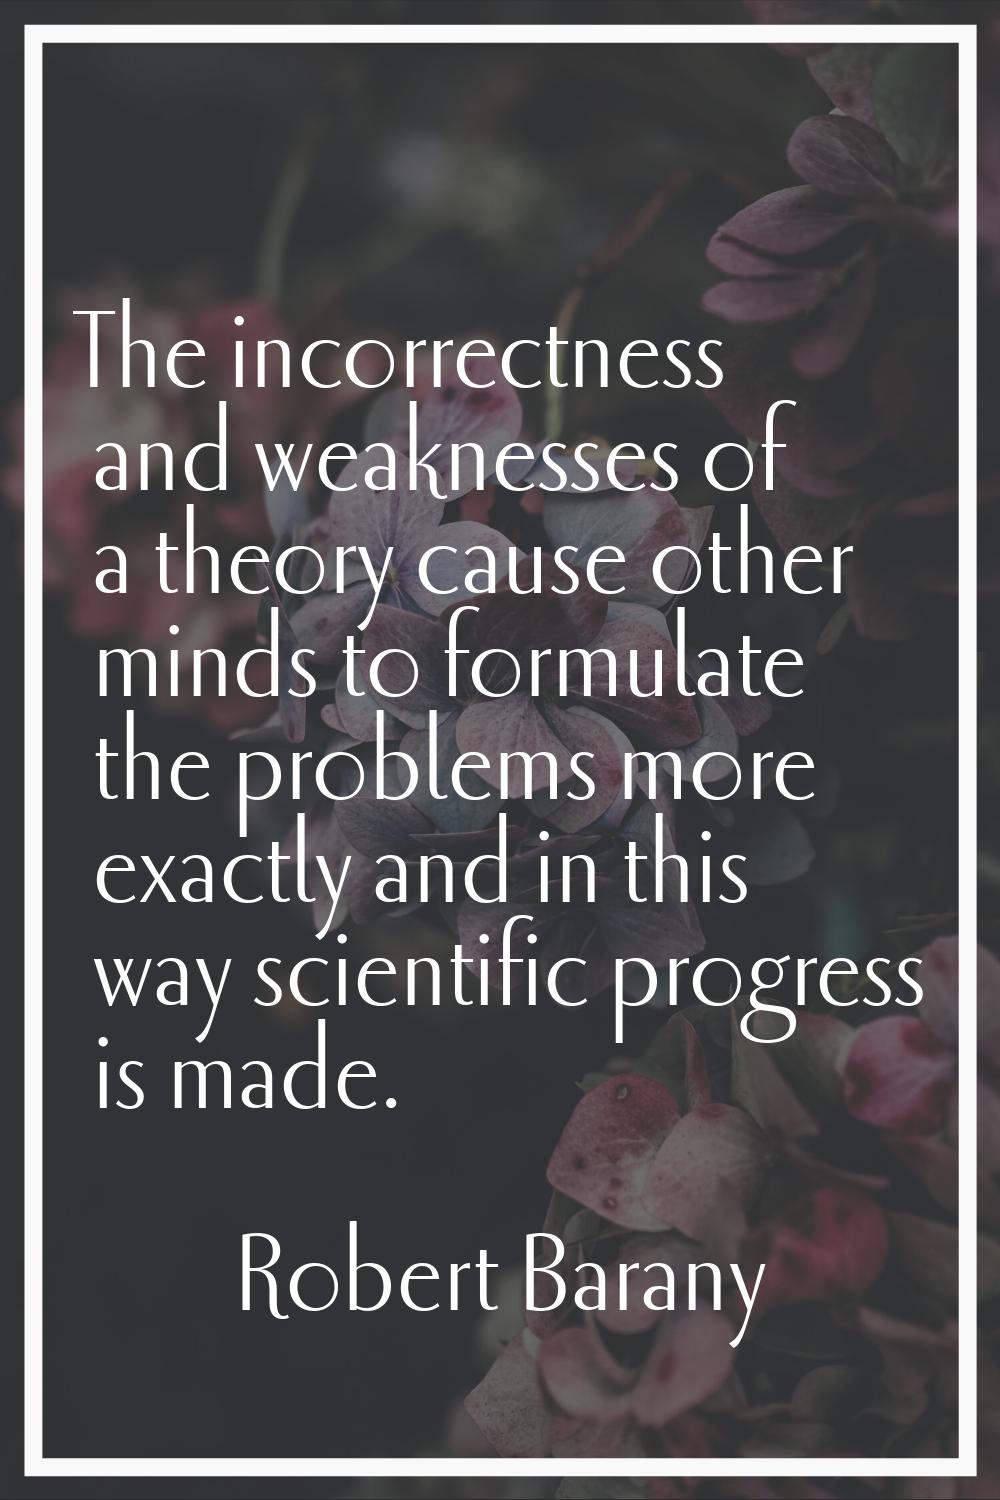 The incorrectness and weaknesses of a theory cause other minds to formulate the problems more exact